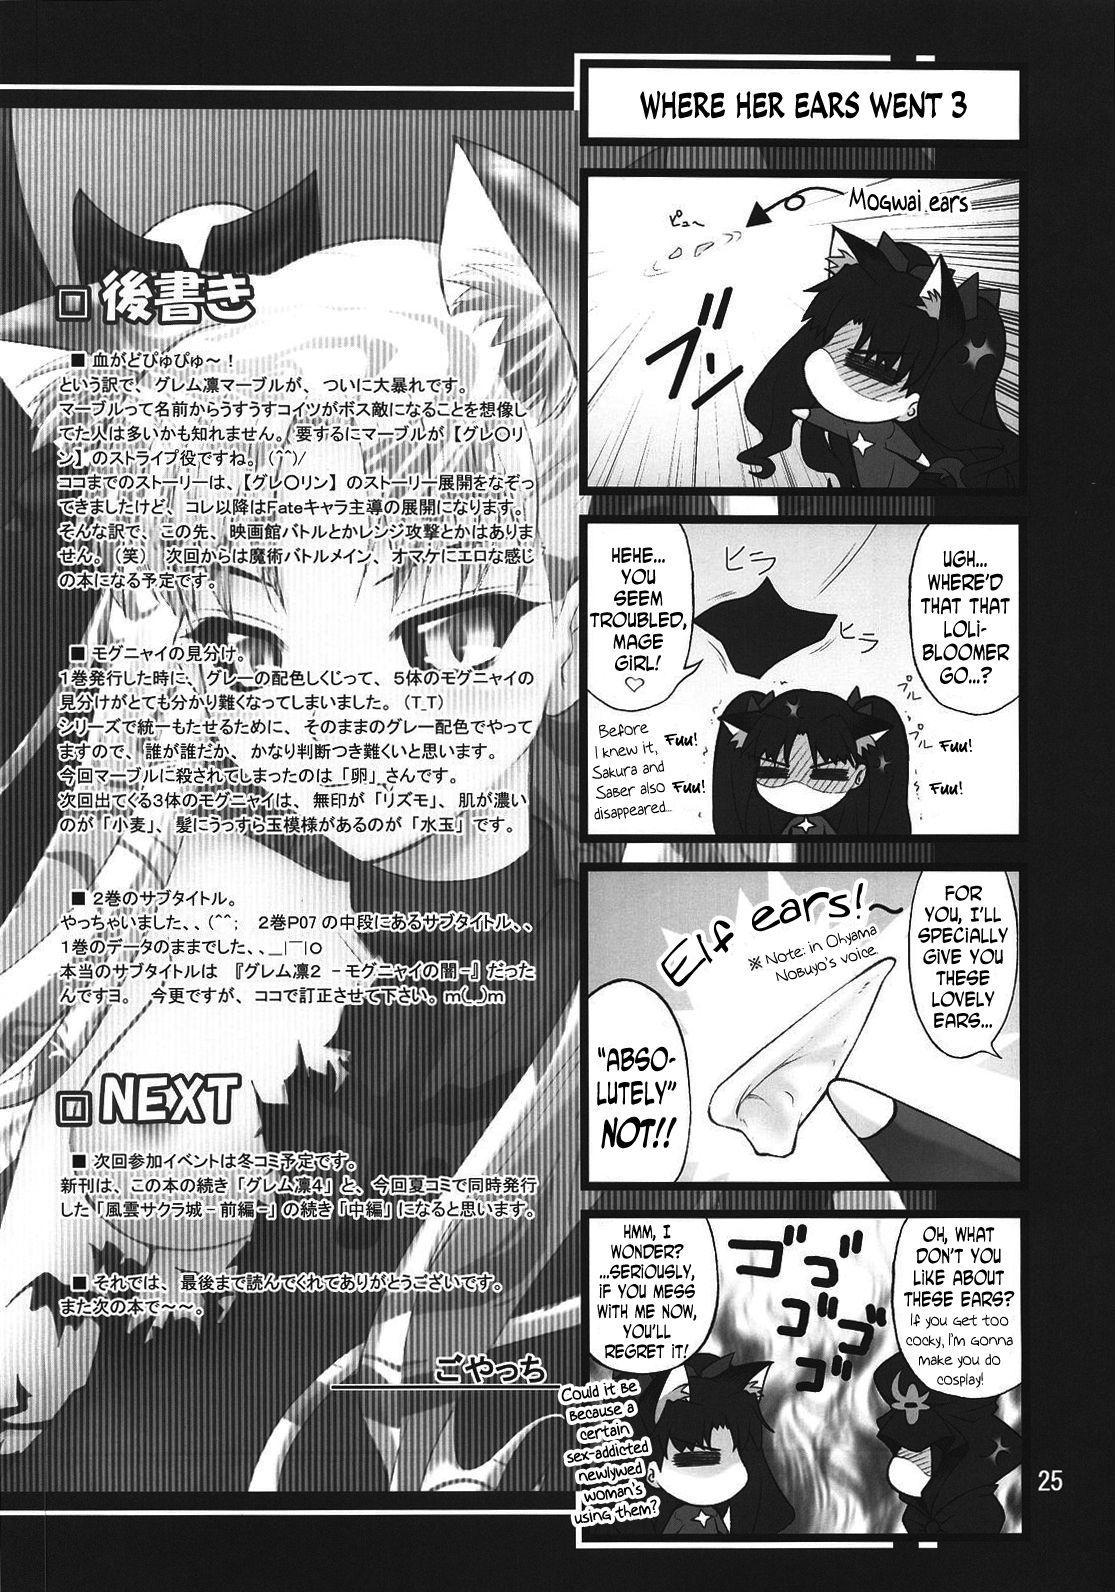 Big Dick Grem-Rin 3 - Fate stay night Anal Porn - Page 24